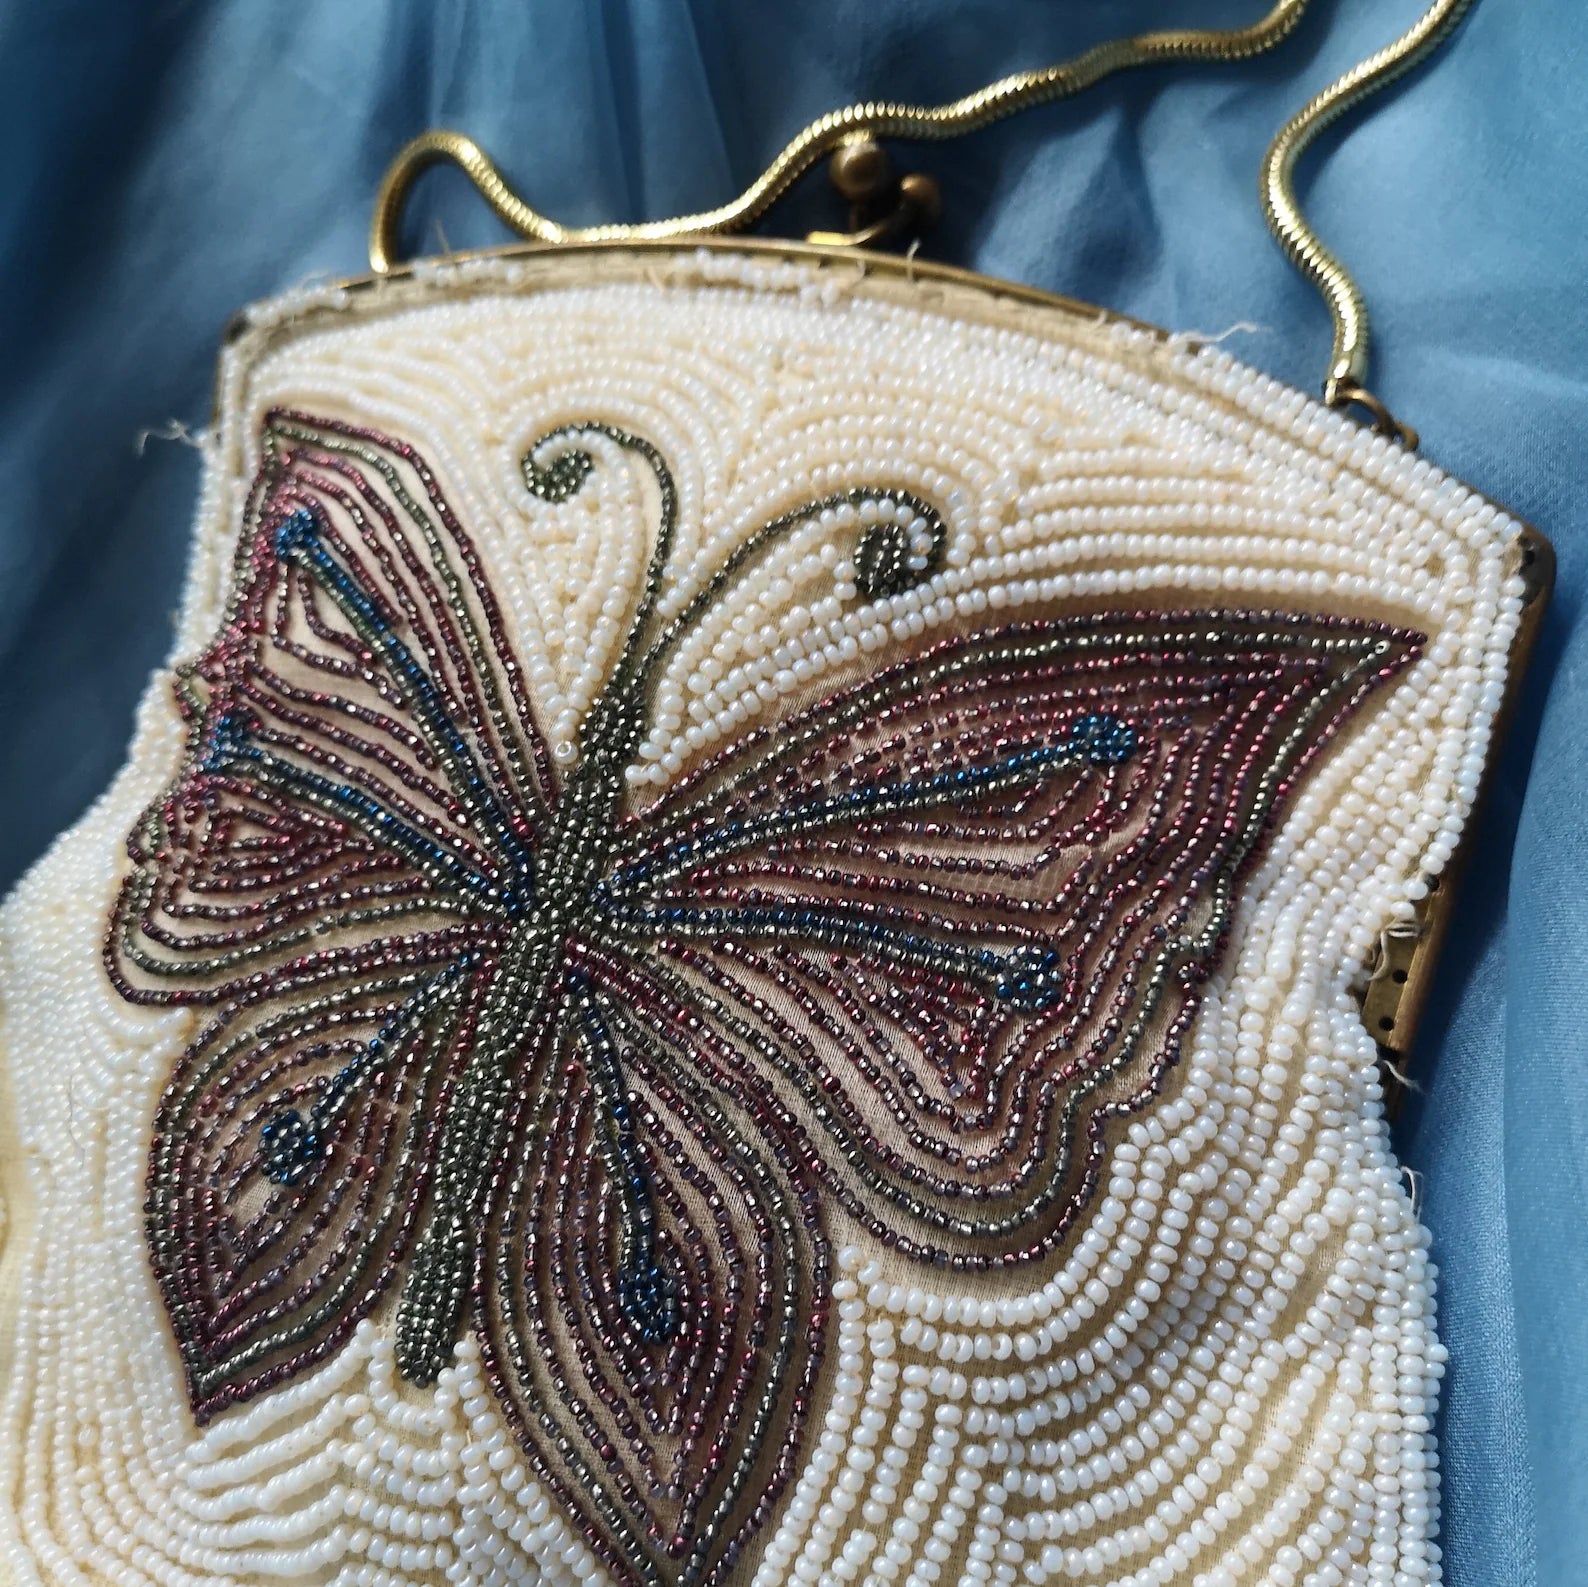 Vintage 30s 40s, Luxury Beaded Designer Purse with Butterfly Motif, Beaded Evening Bag By Josef, Glass Bead Handbag, Made in Belgium